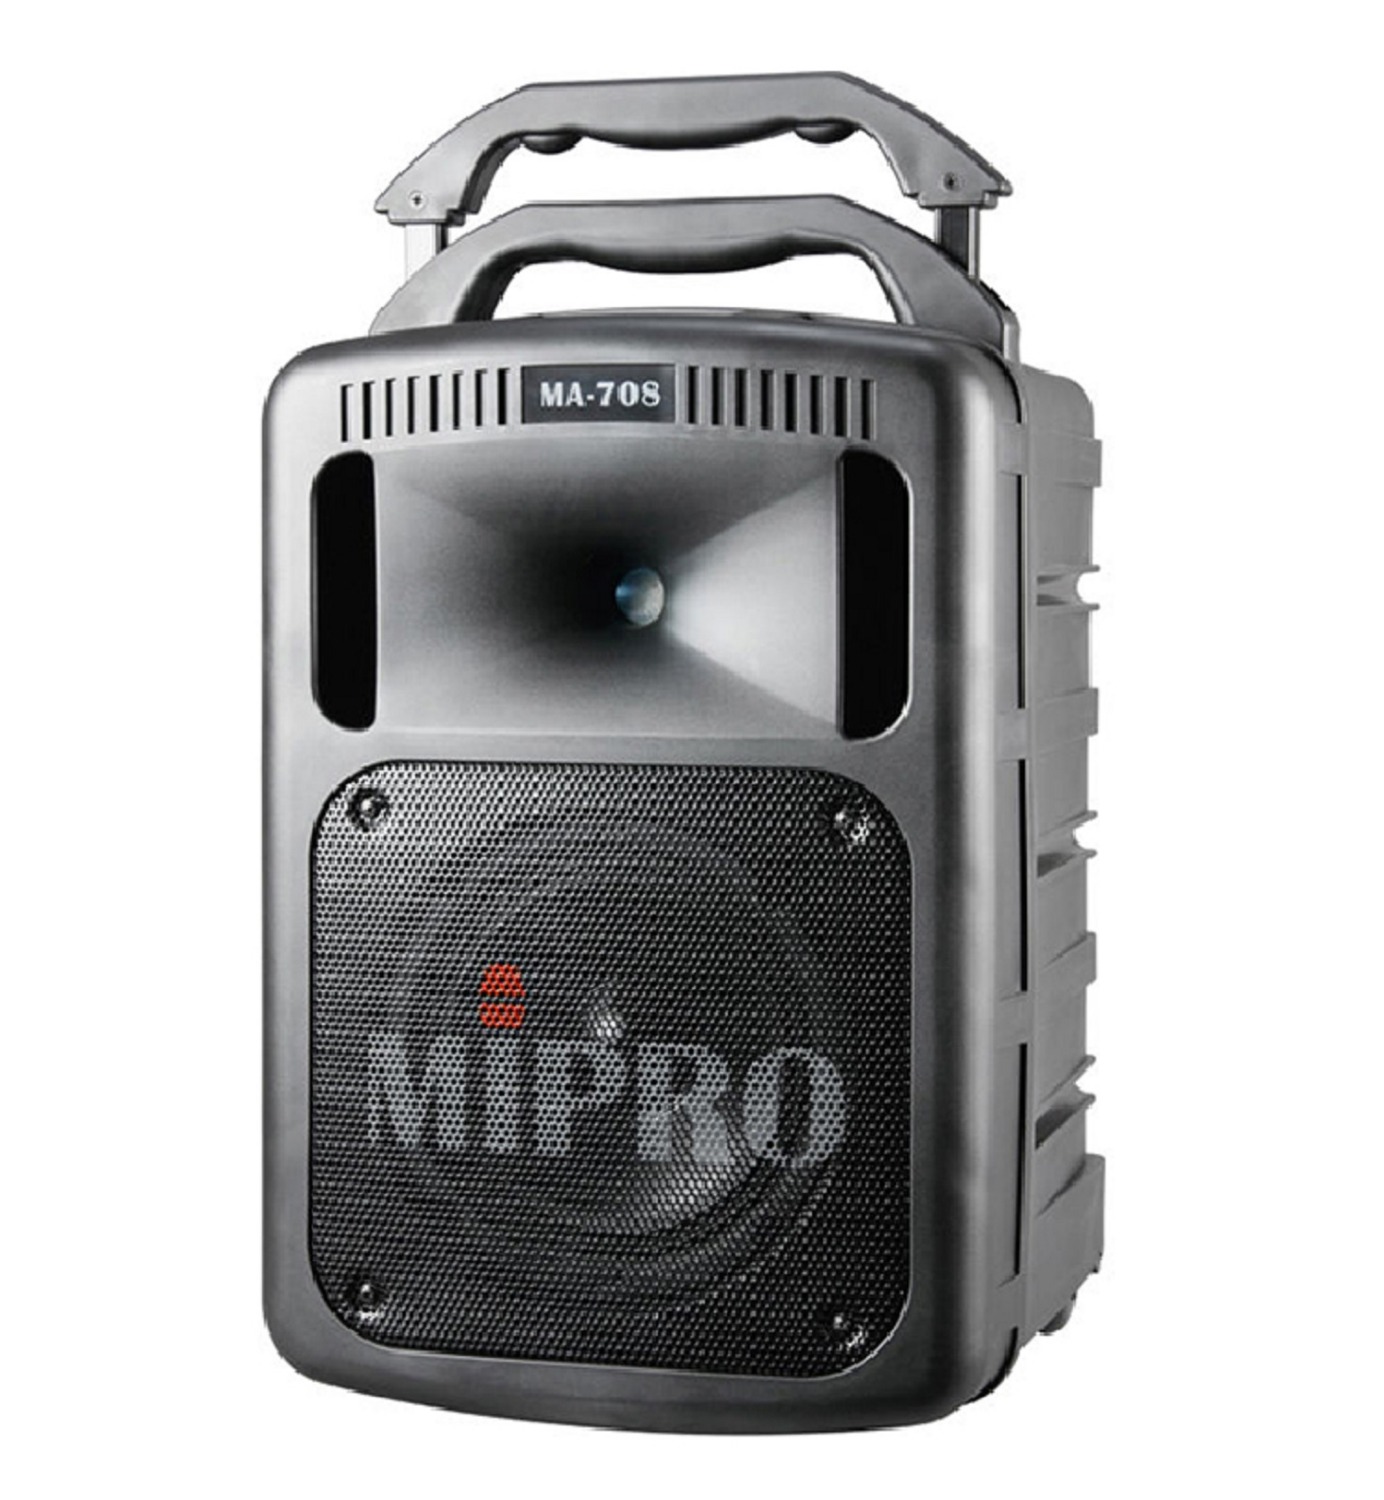 MIPRO MA 708 DPM Portable PA System with Mic 325w